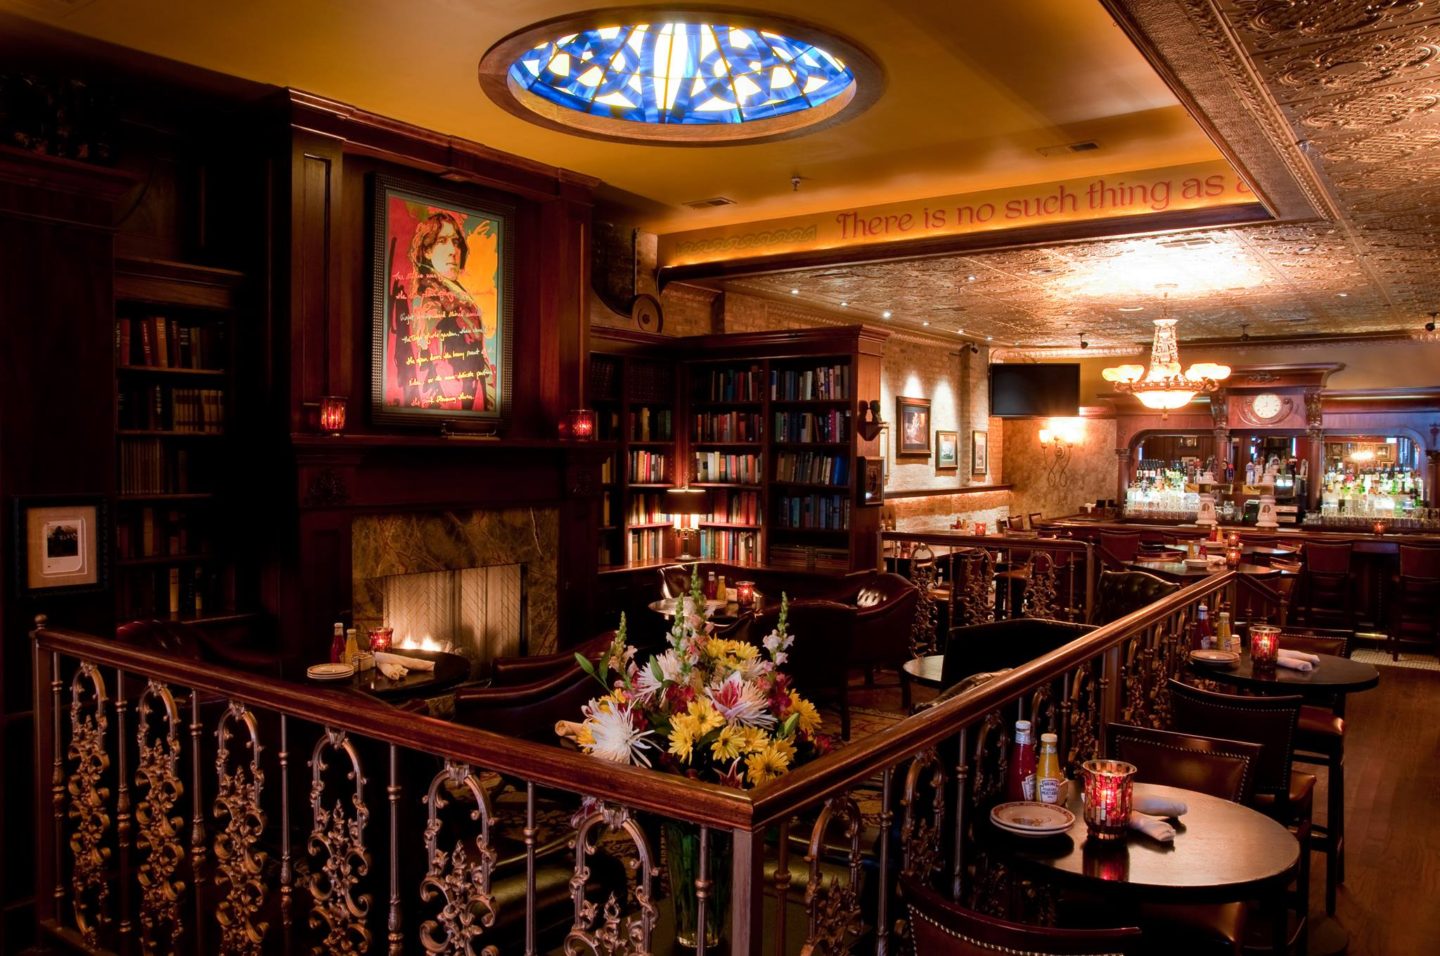 Stay Warm at These Cozy Spots with Fireplaces in the City